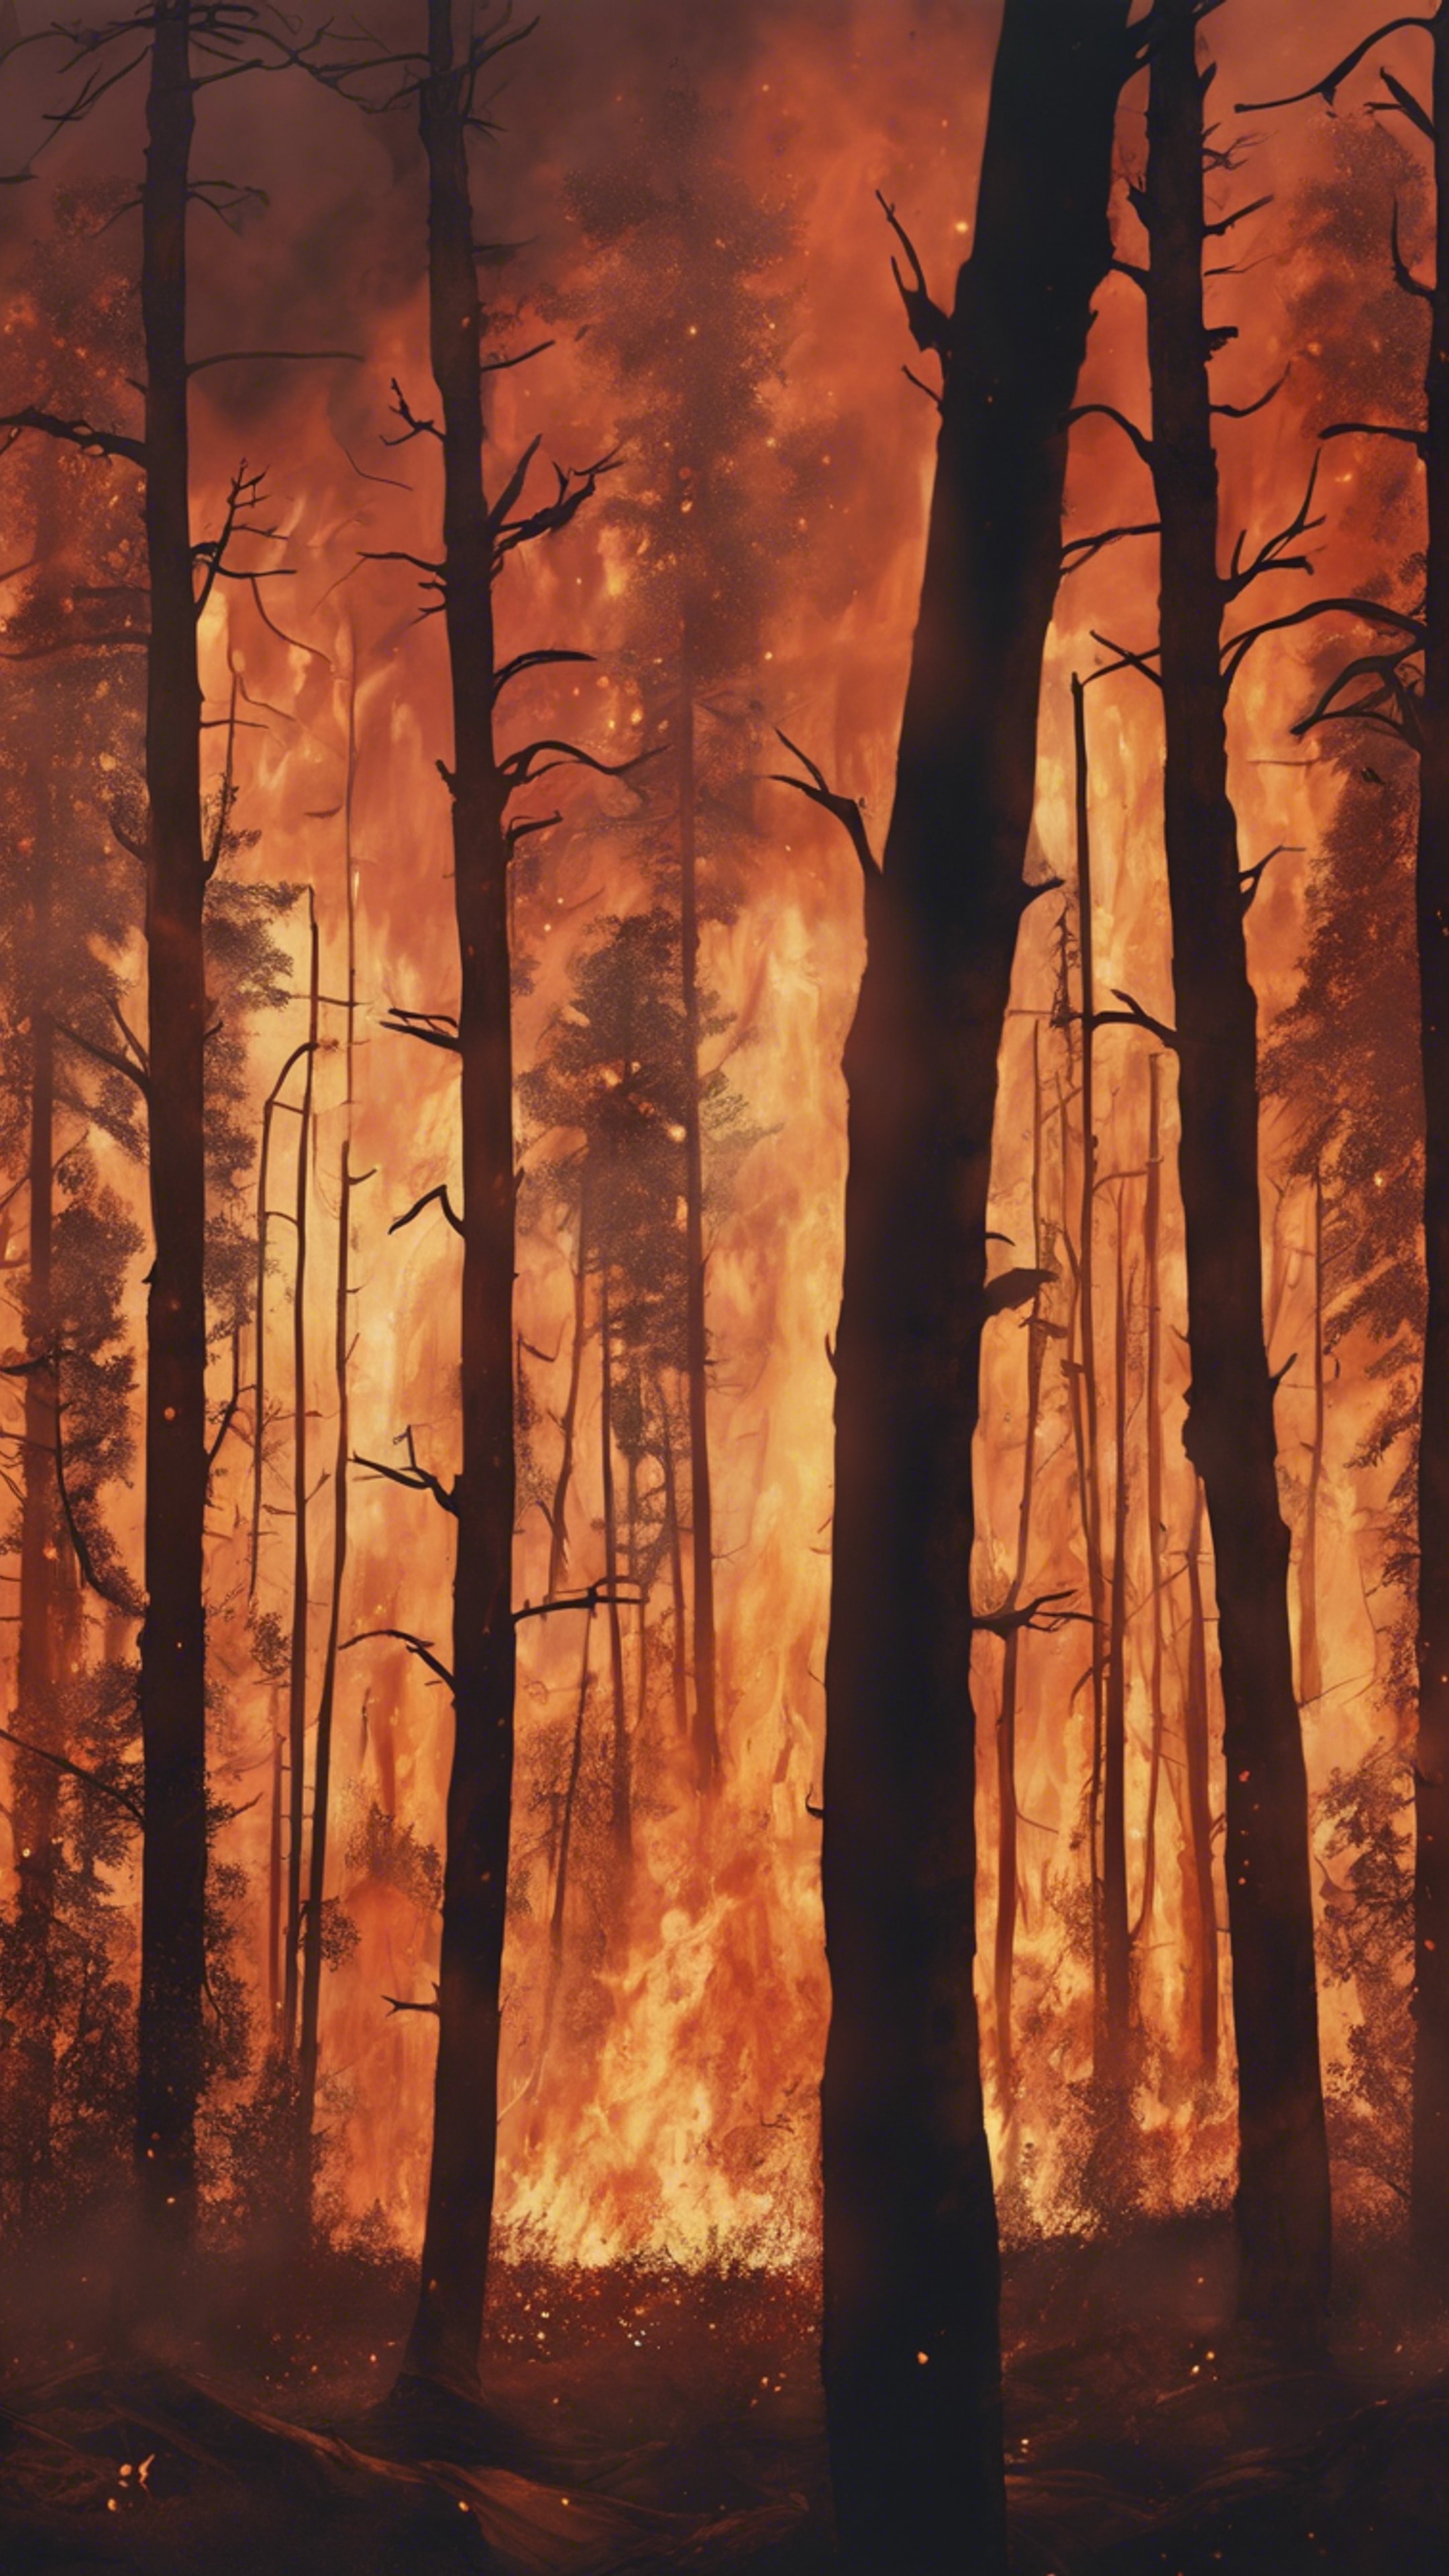 An illuminating painting of a forest fire, capturing both its destructive and regenerative aspects.壁紙[0c13f8b1fb8548ec8376]